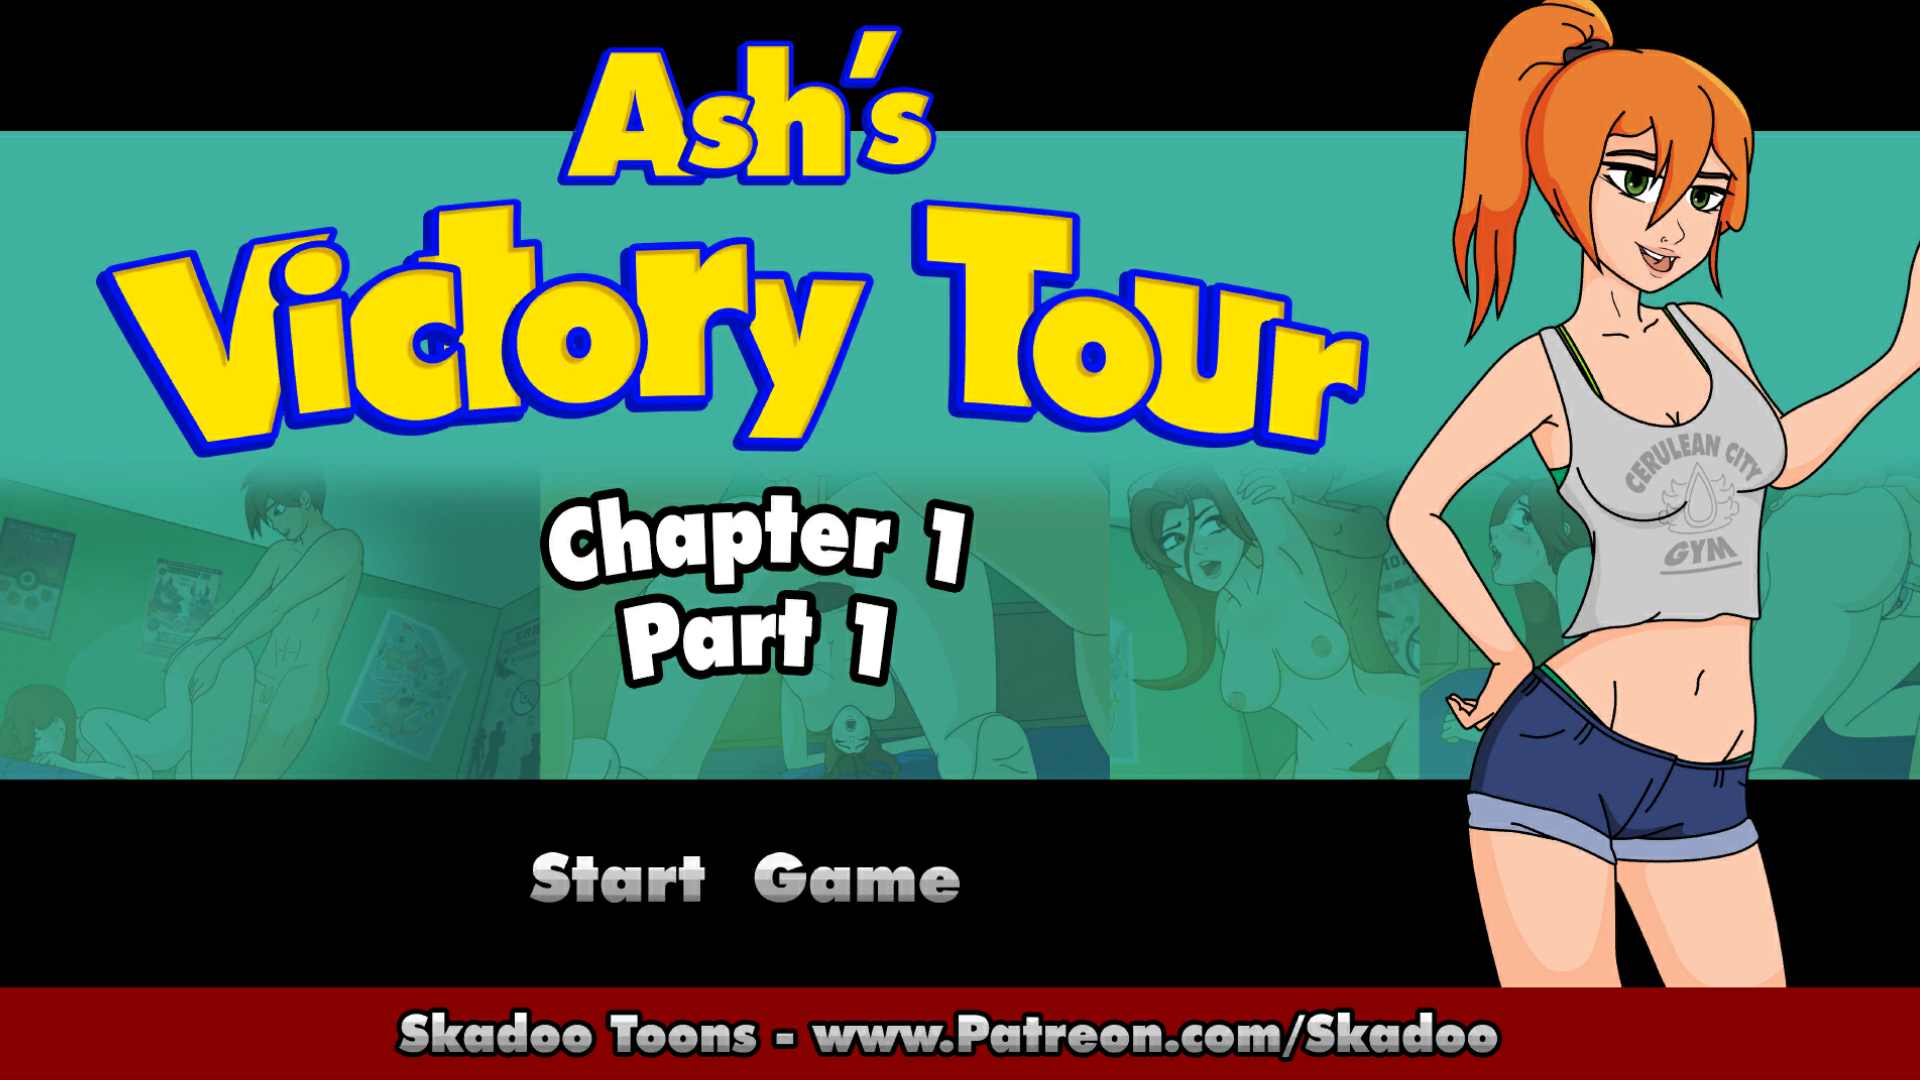 Ash's Victory Tour [Skadoo] Adult xxx Game Download